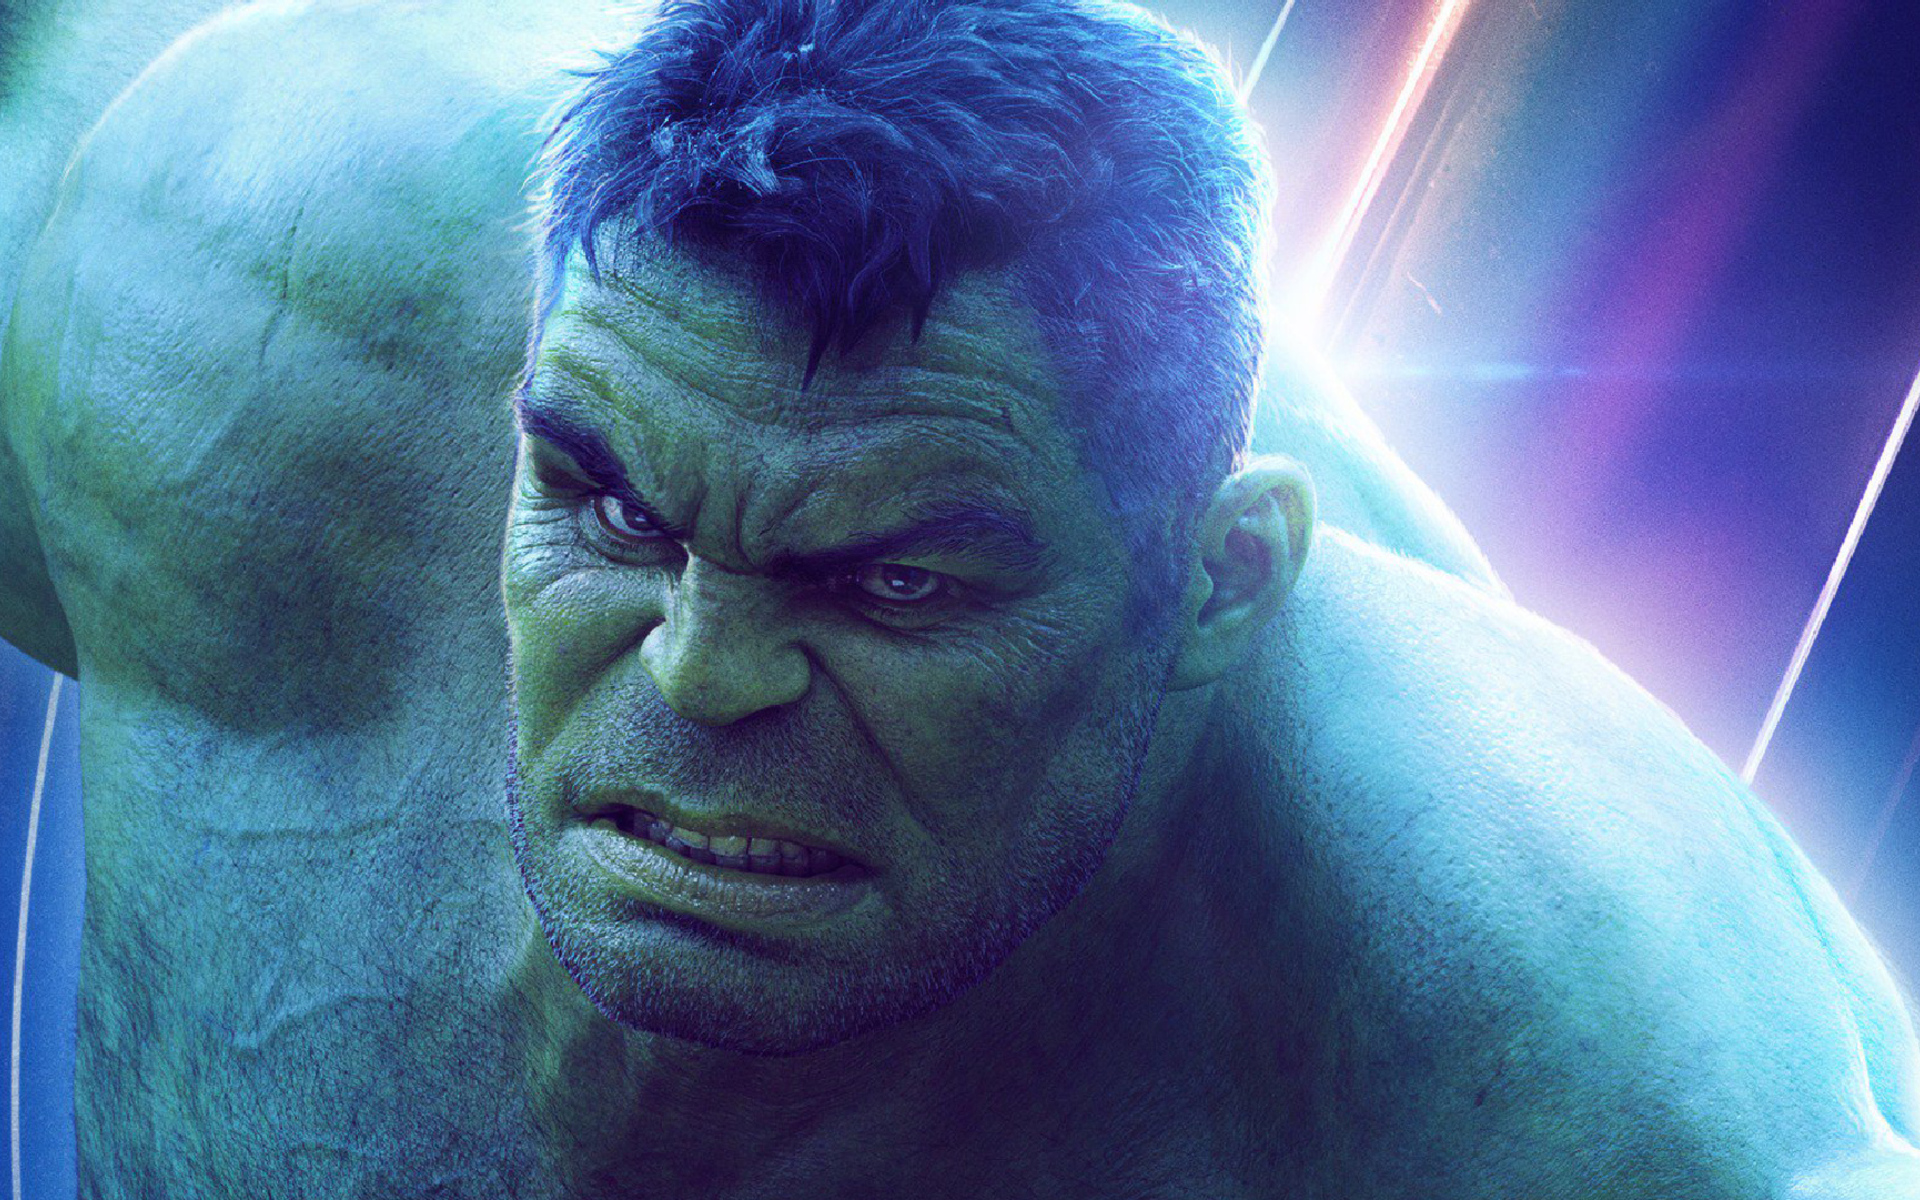 Download wallpaper Hulk, 2018 movie, superheroes, Avengers Infinity War, Bruce Banner for desktop with resolution 1920x1200. High Quality HD picture wallpaper